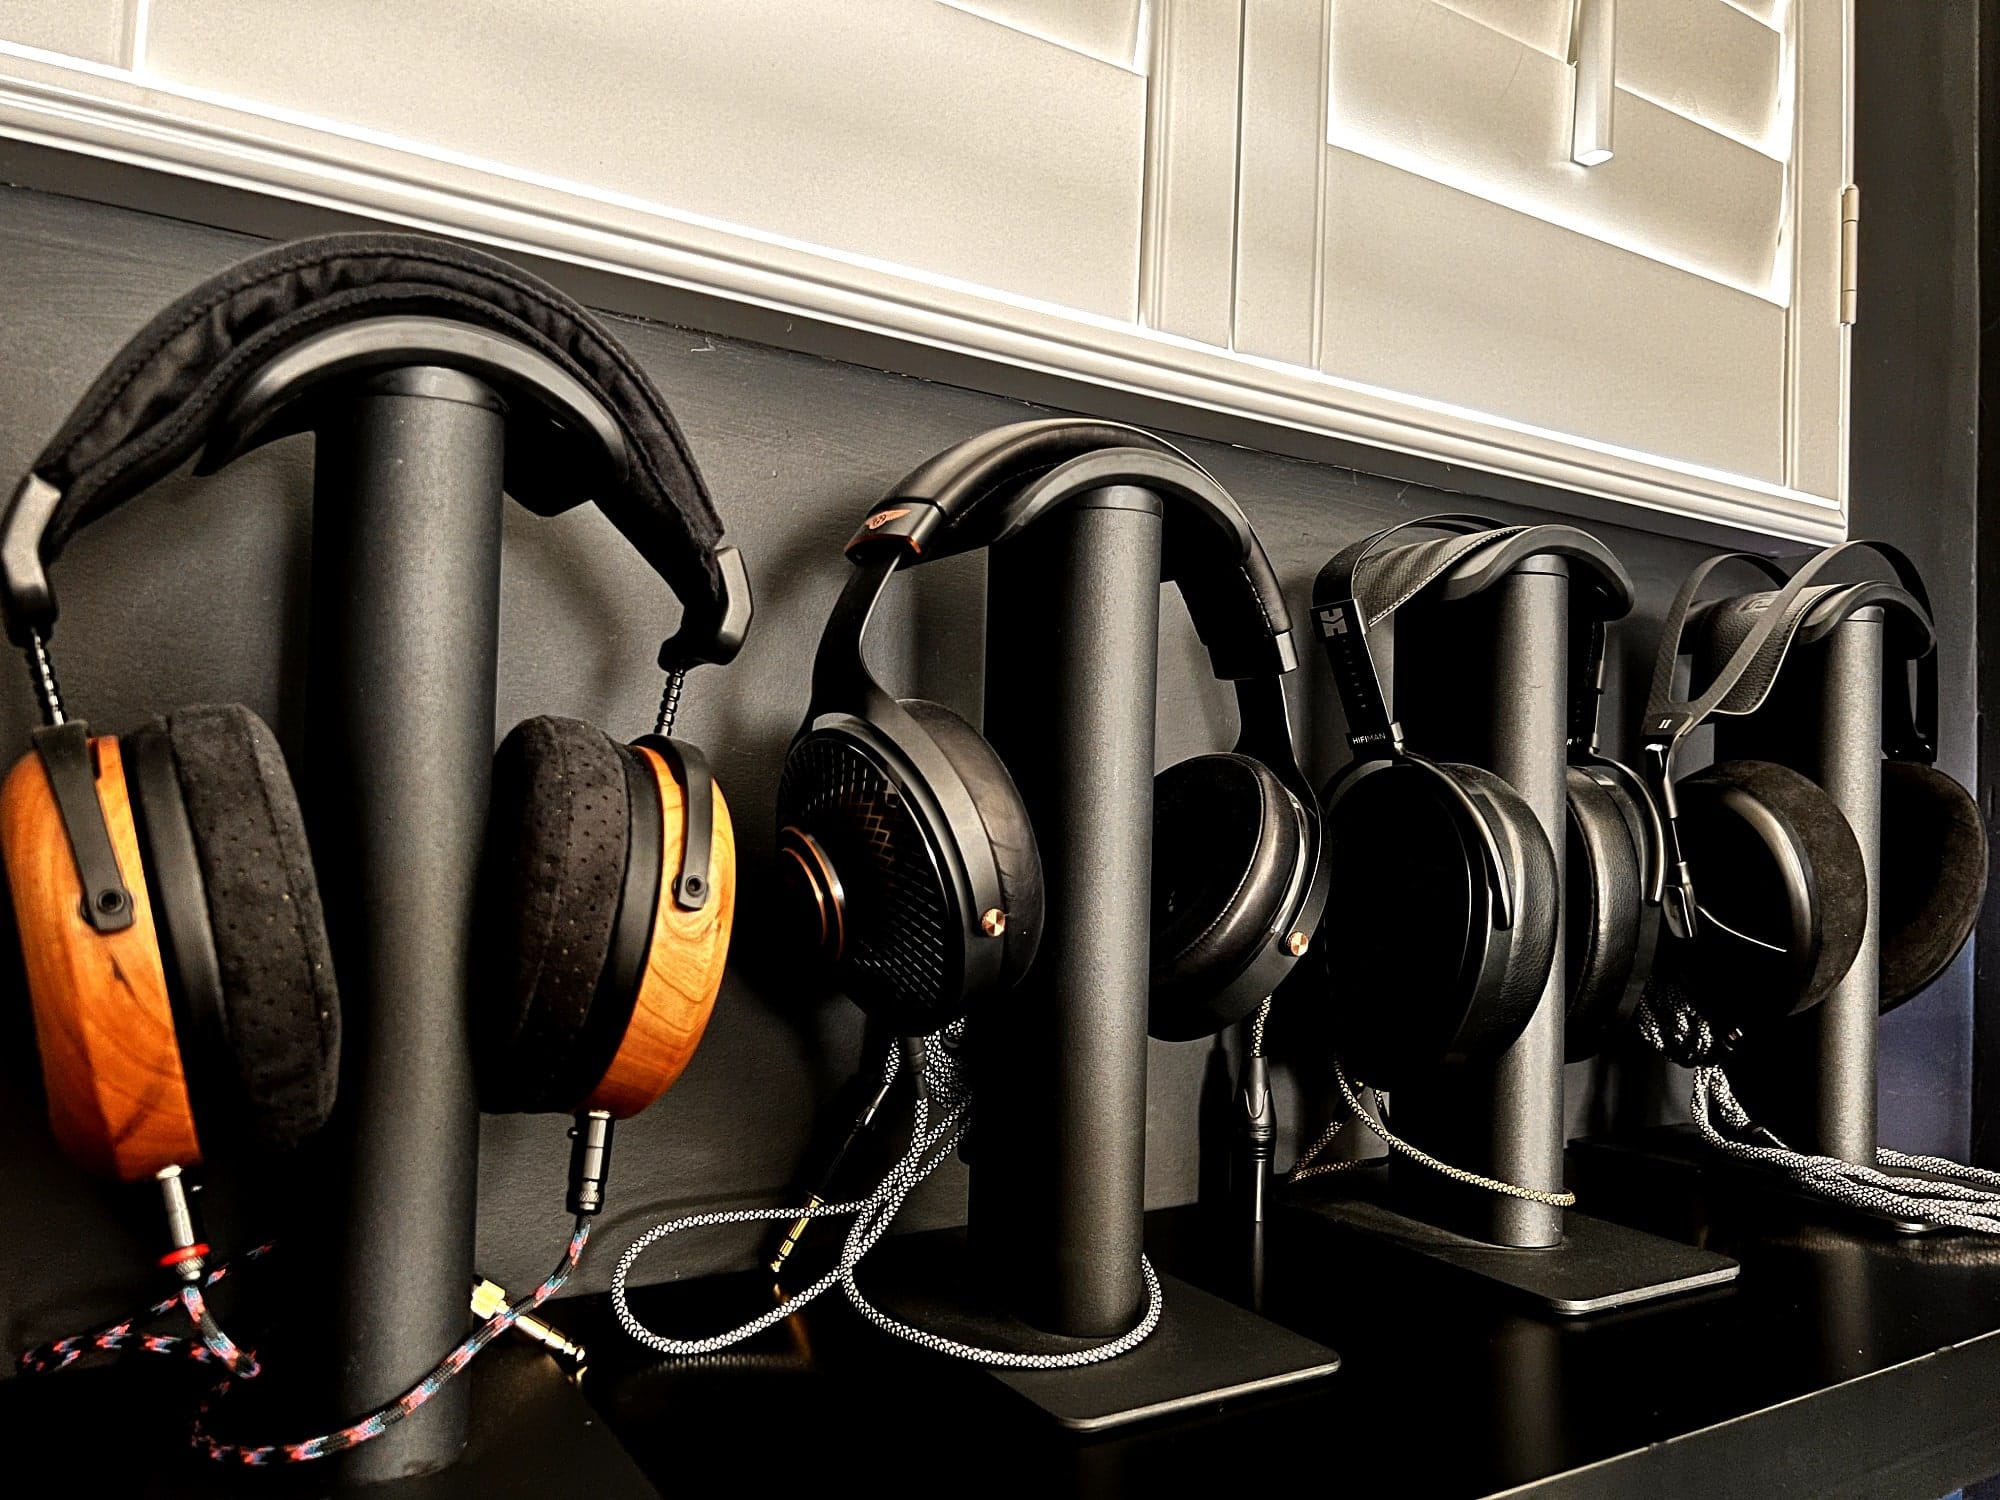 A collection of high-end headphones displayed on stands, featuring the ZMF Caldera, ZMF Atrium, Meze Empyrean Elite, and HiFiMan Arya Stealth, all arranged neatly under a window with white shutters